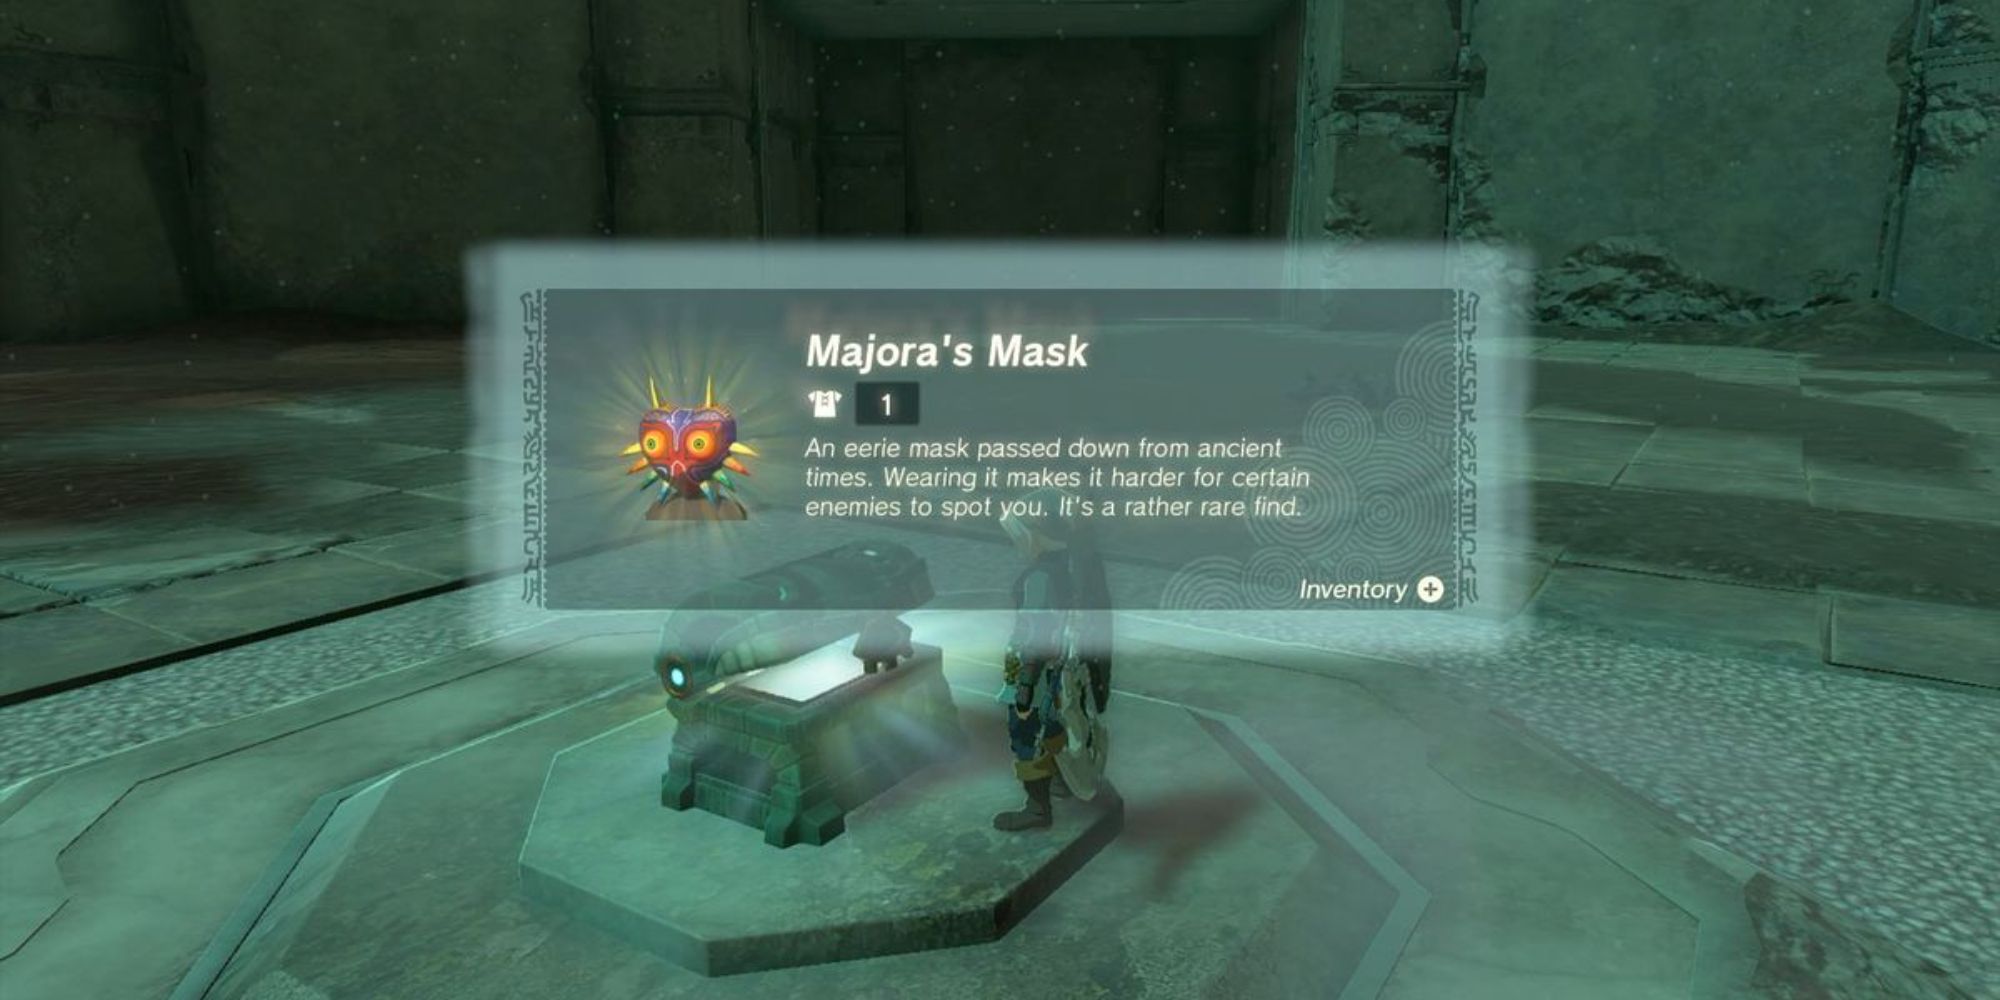 Link finding Majora's Mask in a treasure chest